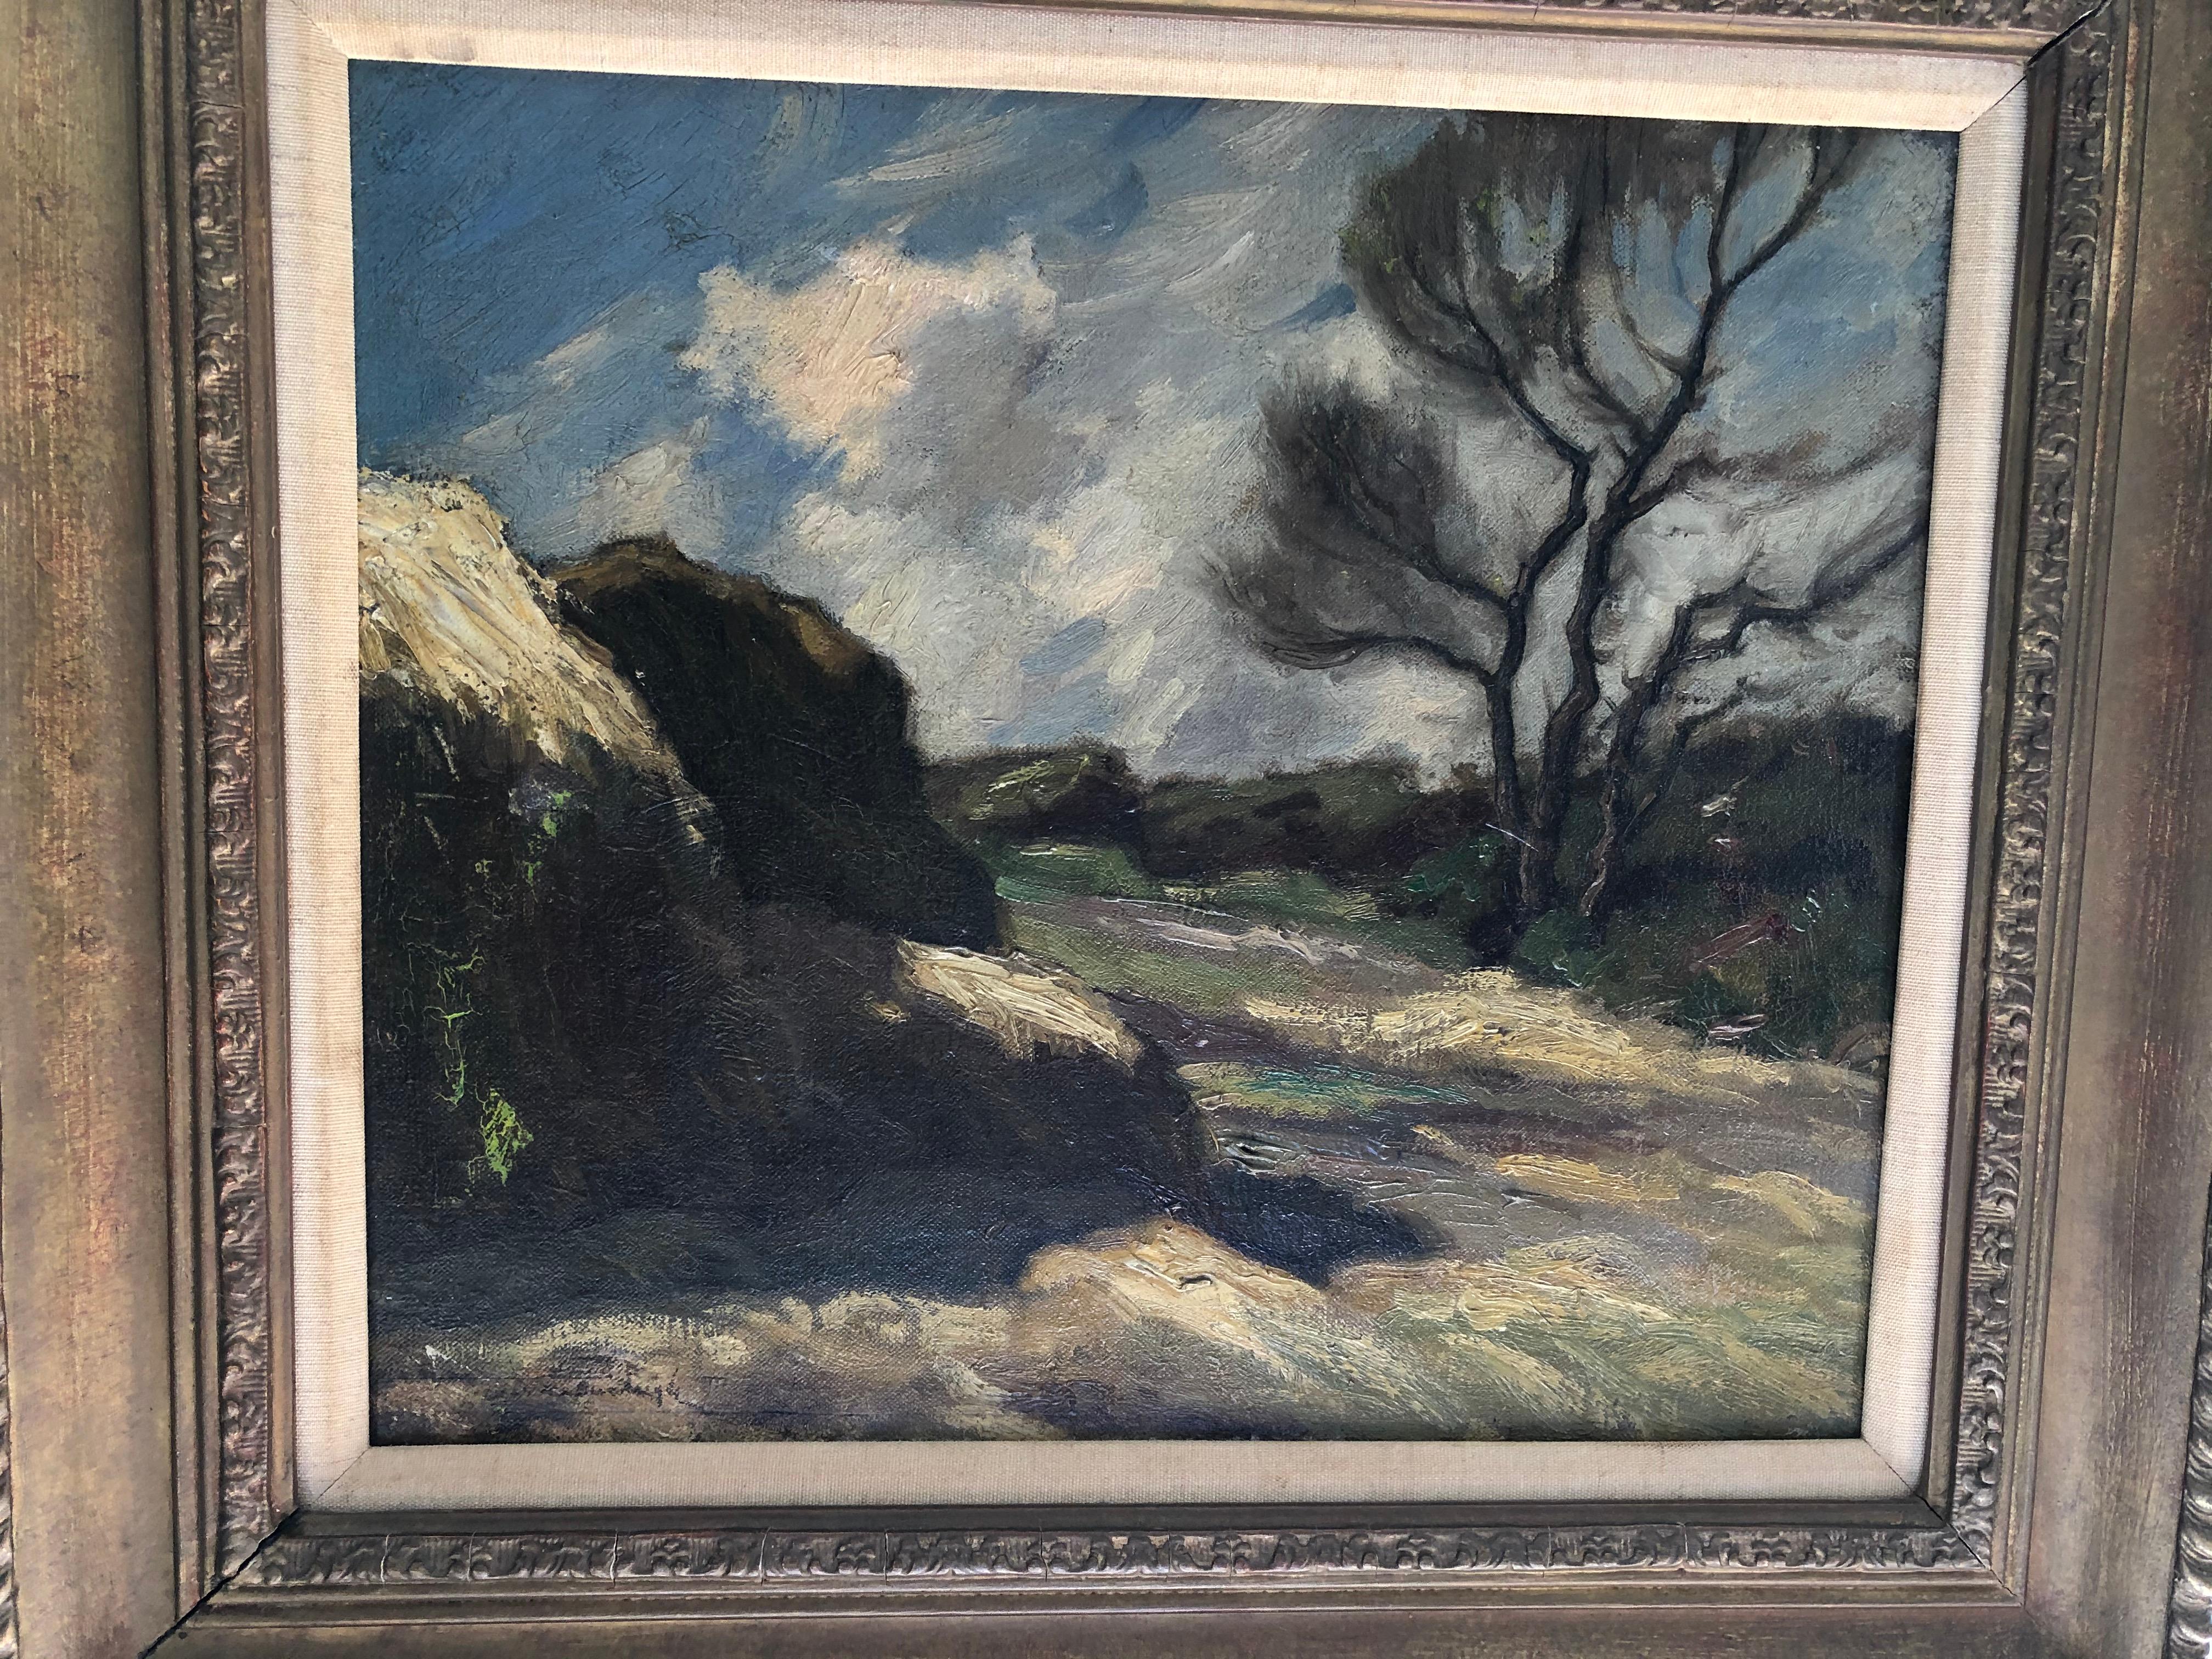 Fabulous late 19th or early 20th century oil on canvas. It looks to be in the style of the Barbizon School moving into impressionim. Most of the early French Impressionists were influenced by the Barbizon Painters. It is signed lower left but I